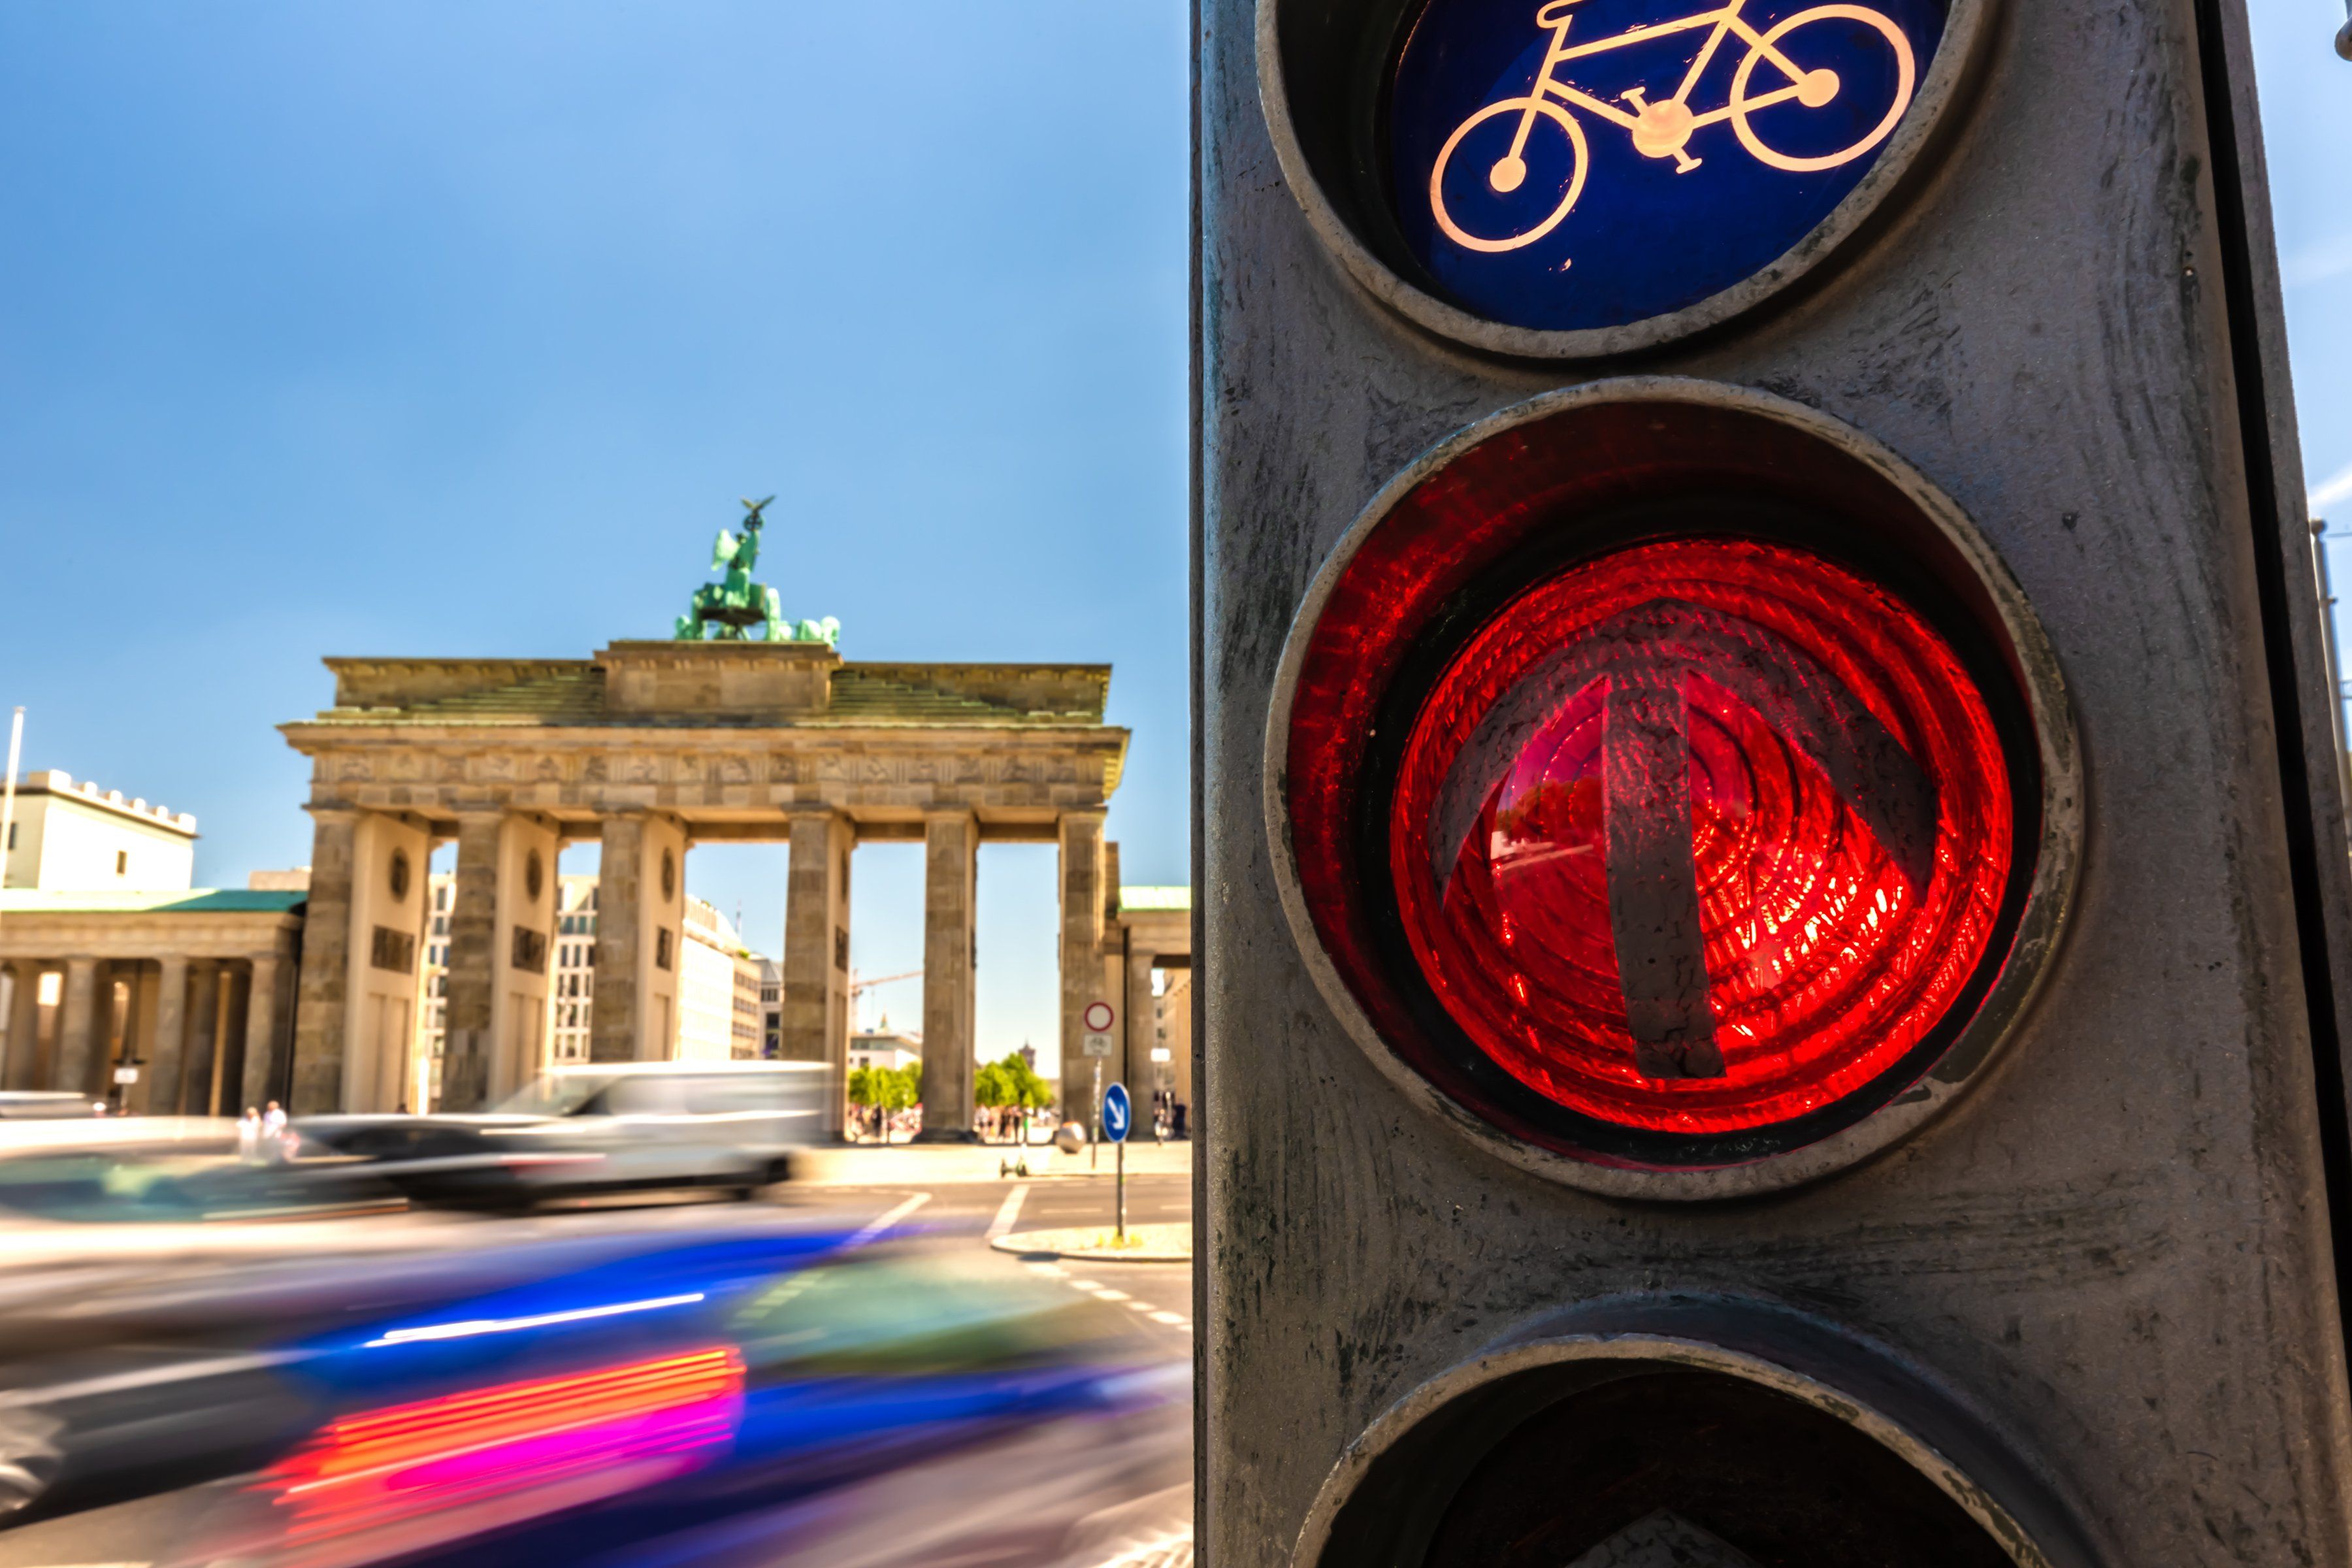 In the foreground, a German traffic light is lit red for cars and go for bikes. In the background, motion blurred traffic moves through a busy intersection.